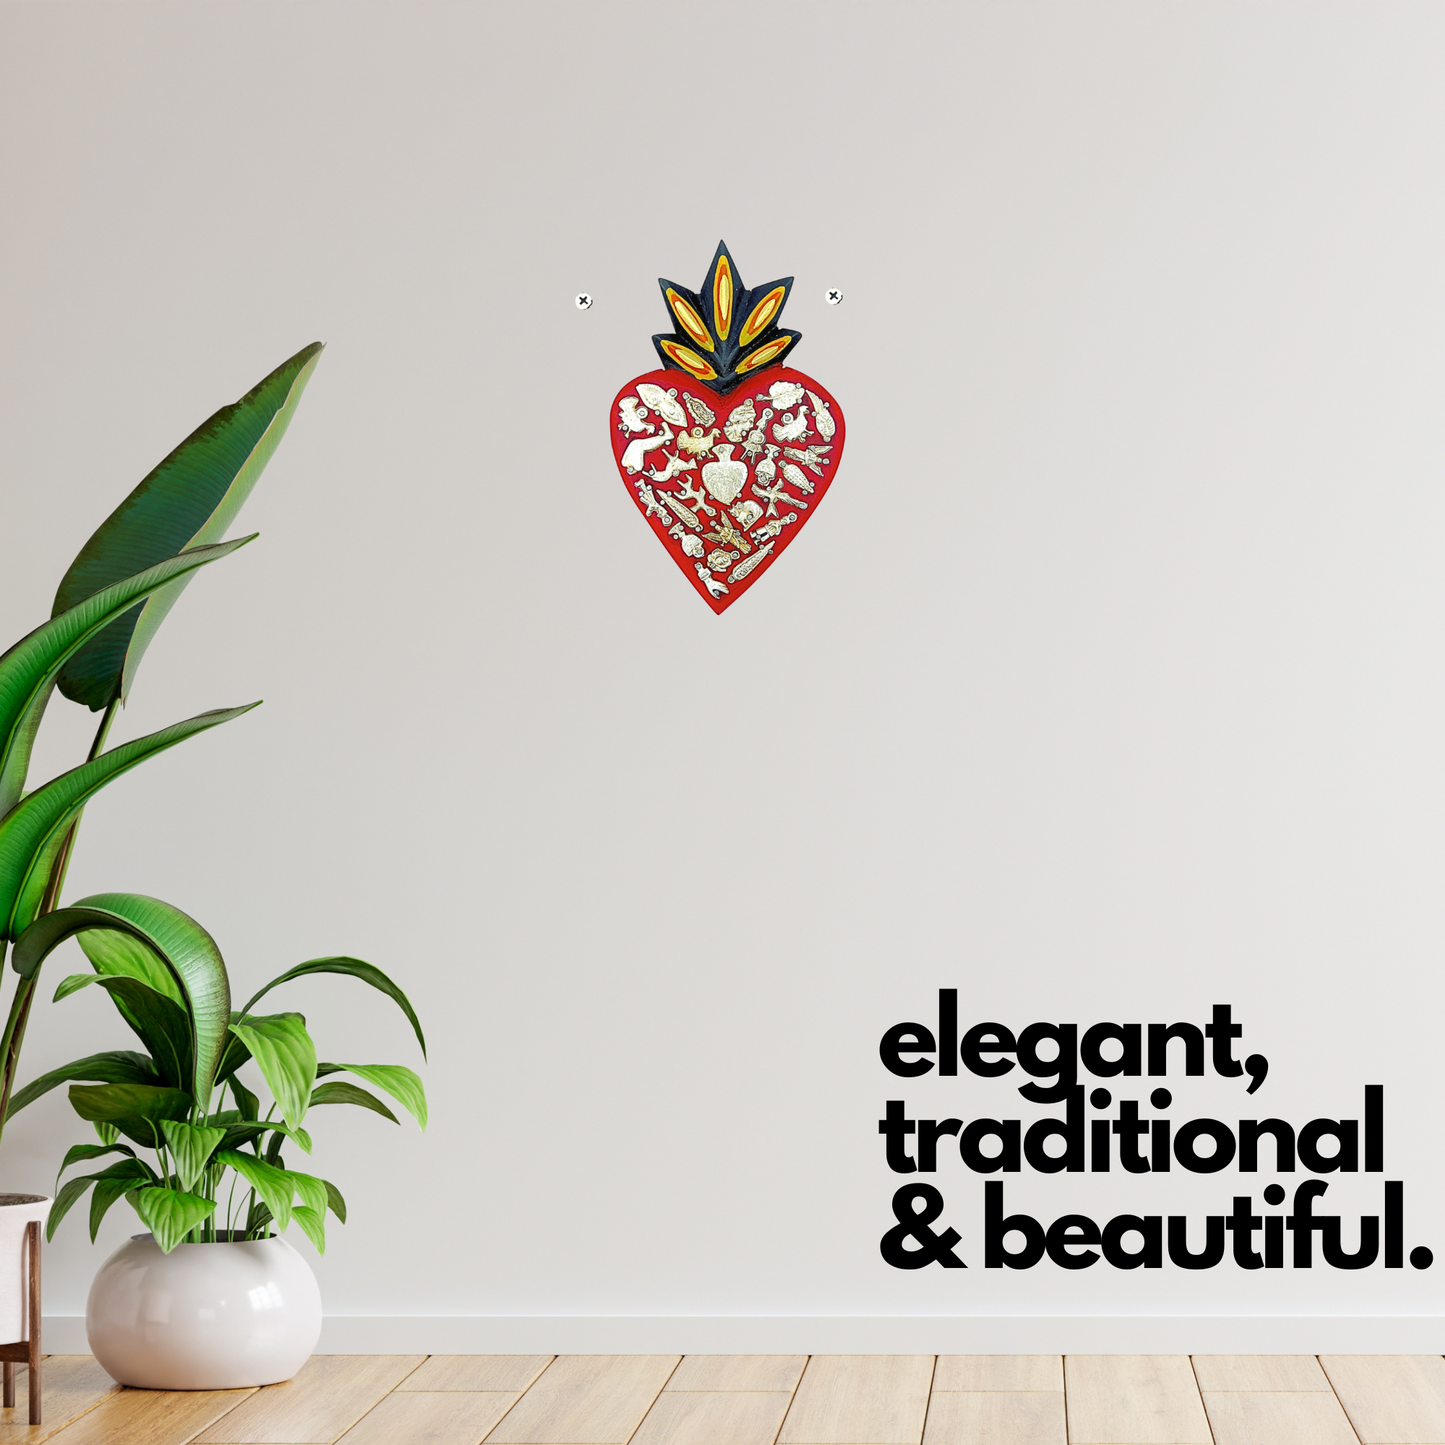 elegant traditional and beautiful Casa Fiesta Designs' Ex Voto Sacred Heart - Handcrafted and Hand-painted Mexican Milagros Wall Decor.